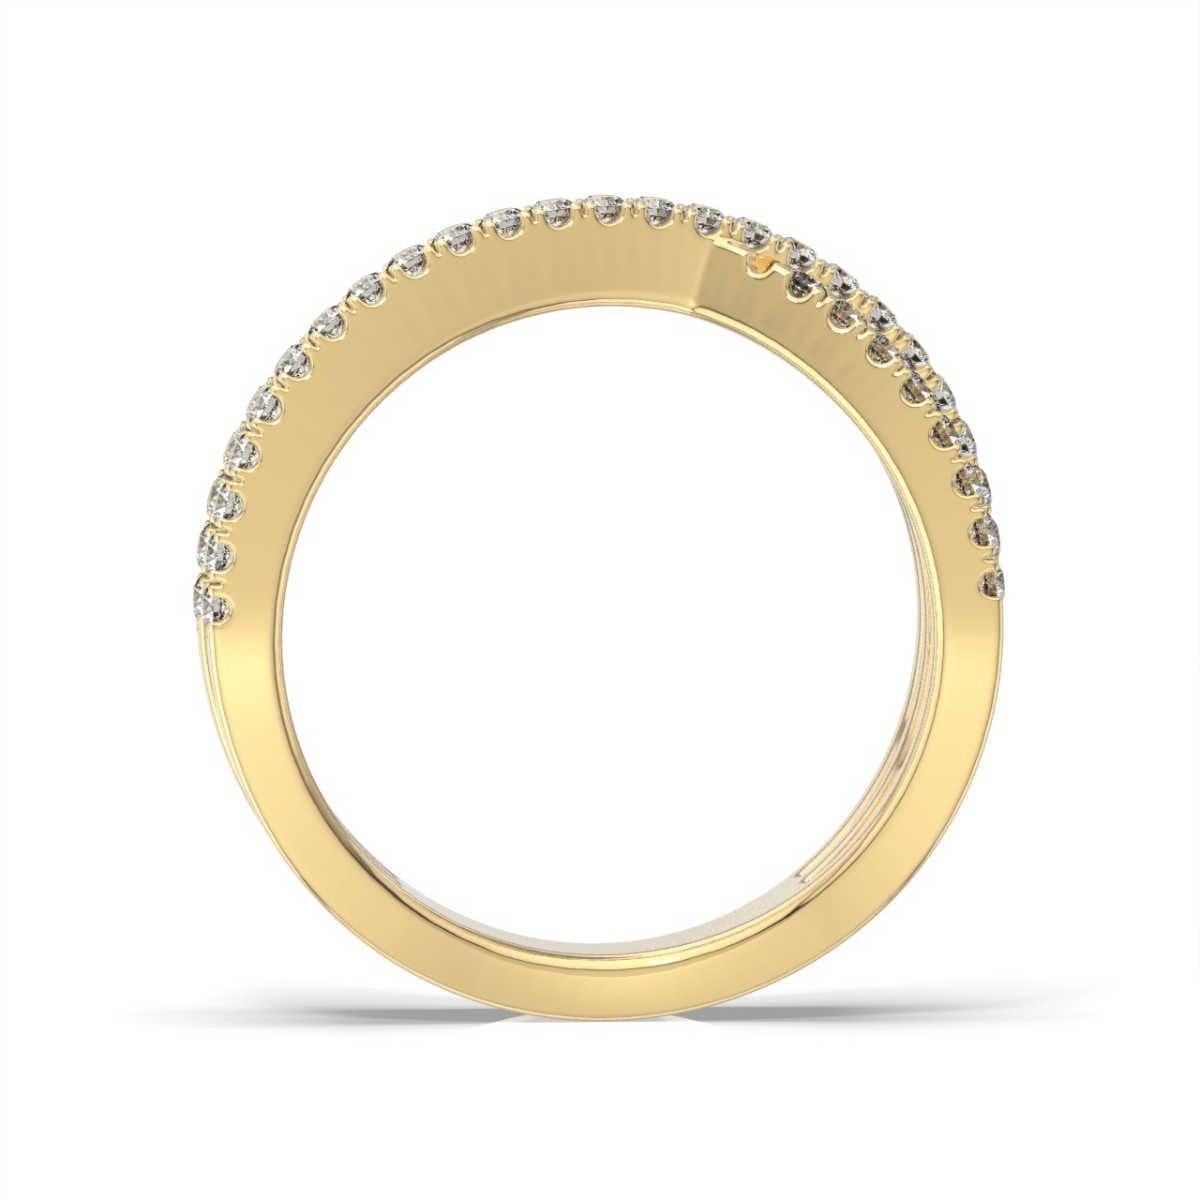 This contemporary, fashionable ring features three rows of Interweave Micro Prongs set diamonds.

Product details: 

Center Gemstone Color: WHITE
Side Gemstone Type: NATURAL DIAMOND
Side Gemstone Shape: ROUND
Metal: 14K Yellow Gold
Metal Weight: